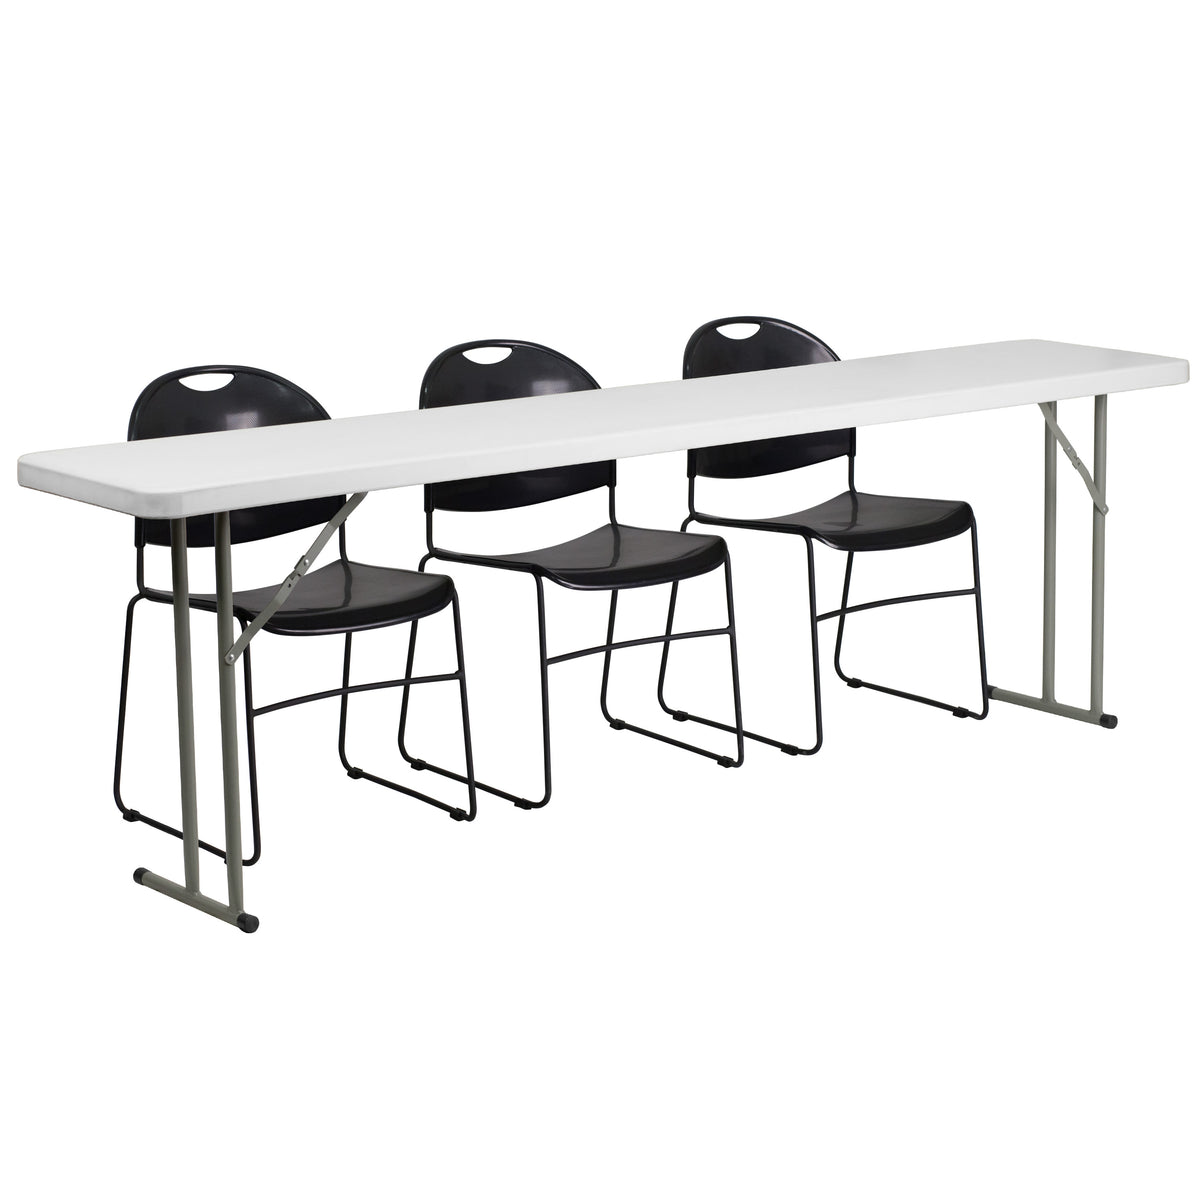 8-Foot Plastic Folding Training Table Set with 3 Black Plastic Stack Chairs